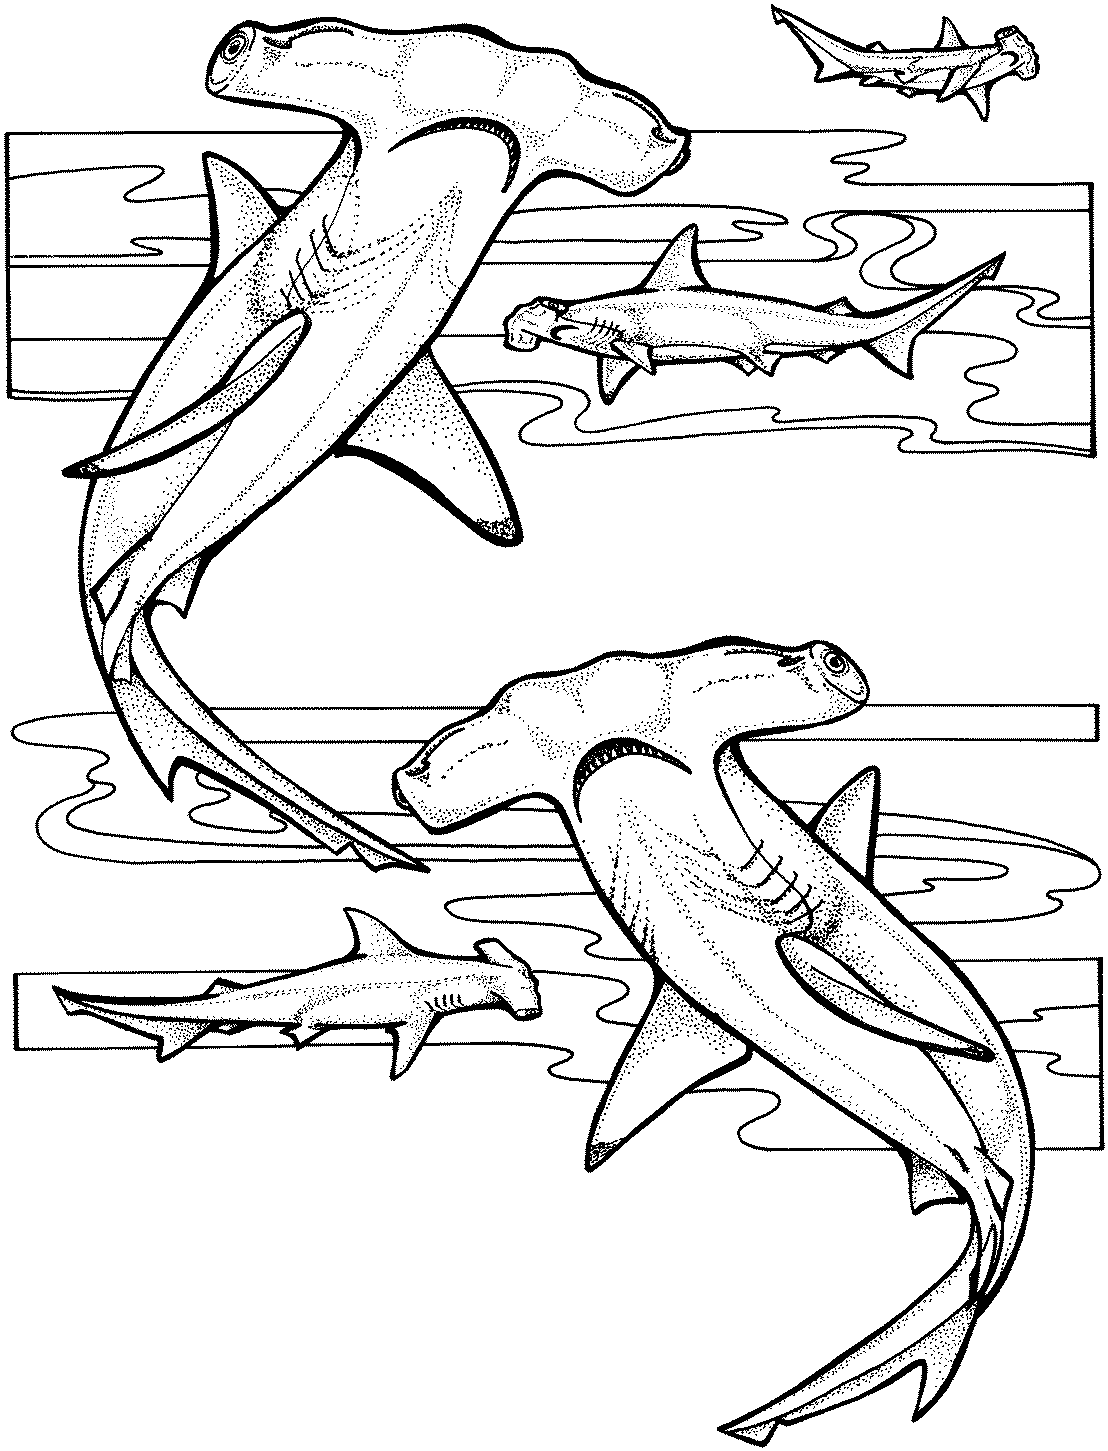 Hammerhead Sharks Coloring Page